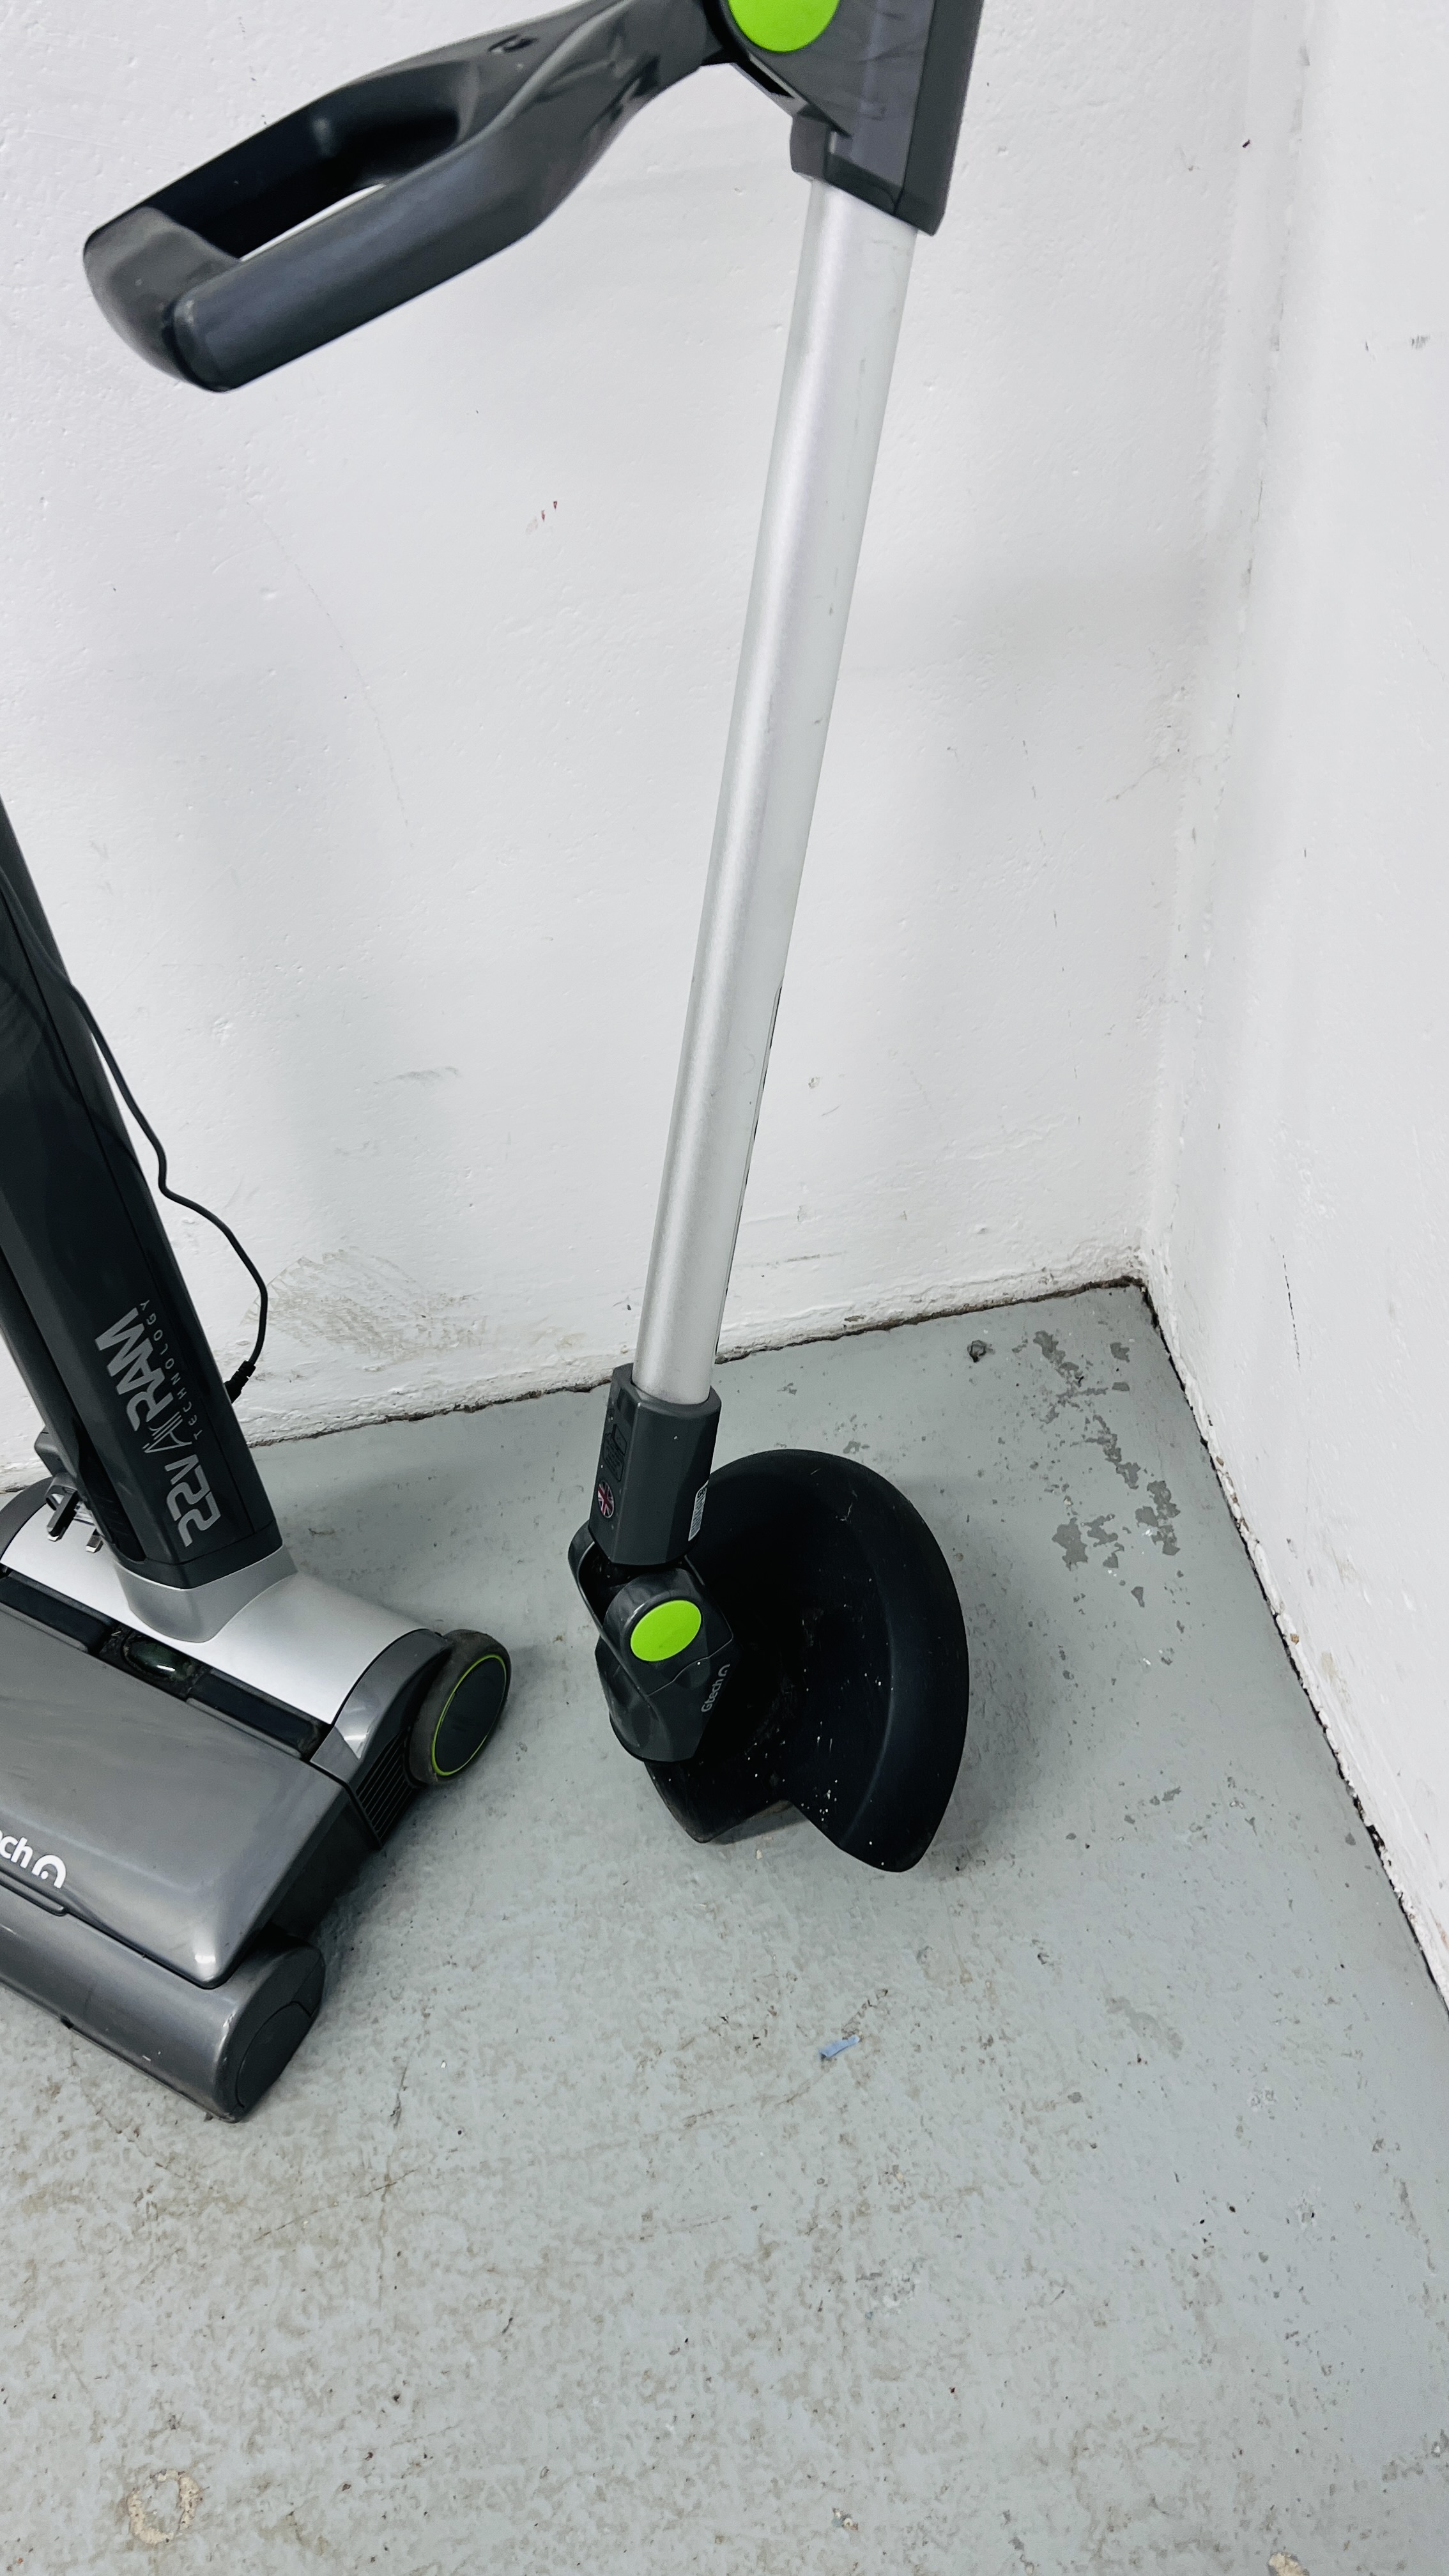 A GTECH AIR RAM CORDLESS VACUUM CLEANER WITH CHARGER ALONG WITH A GTECH CORDLESS STRIMMER (NO - Image 3 of 5